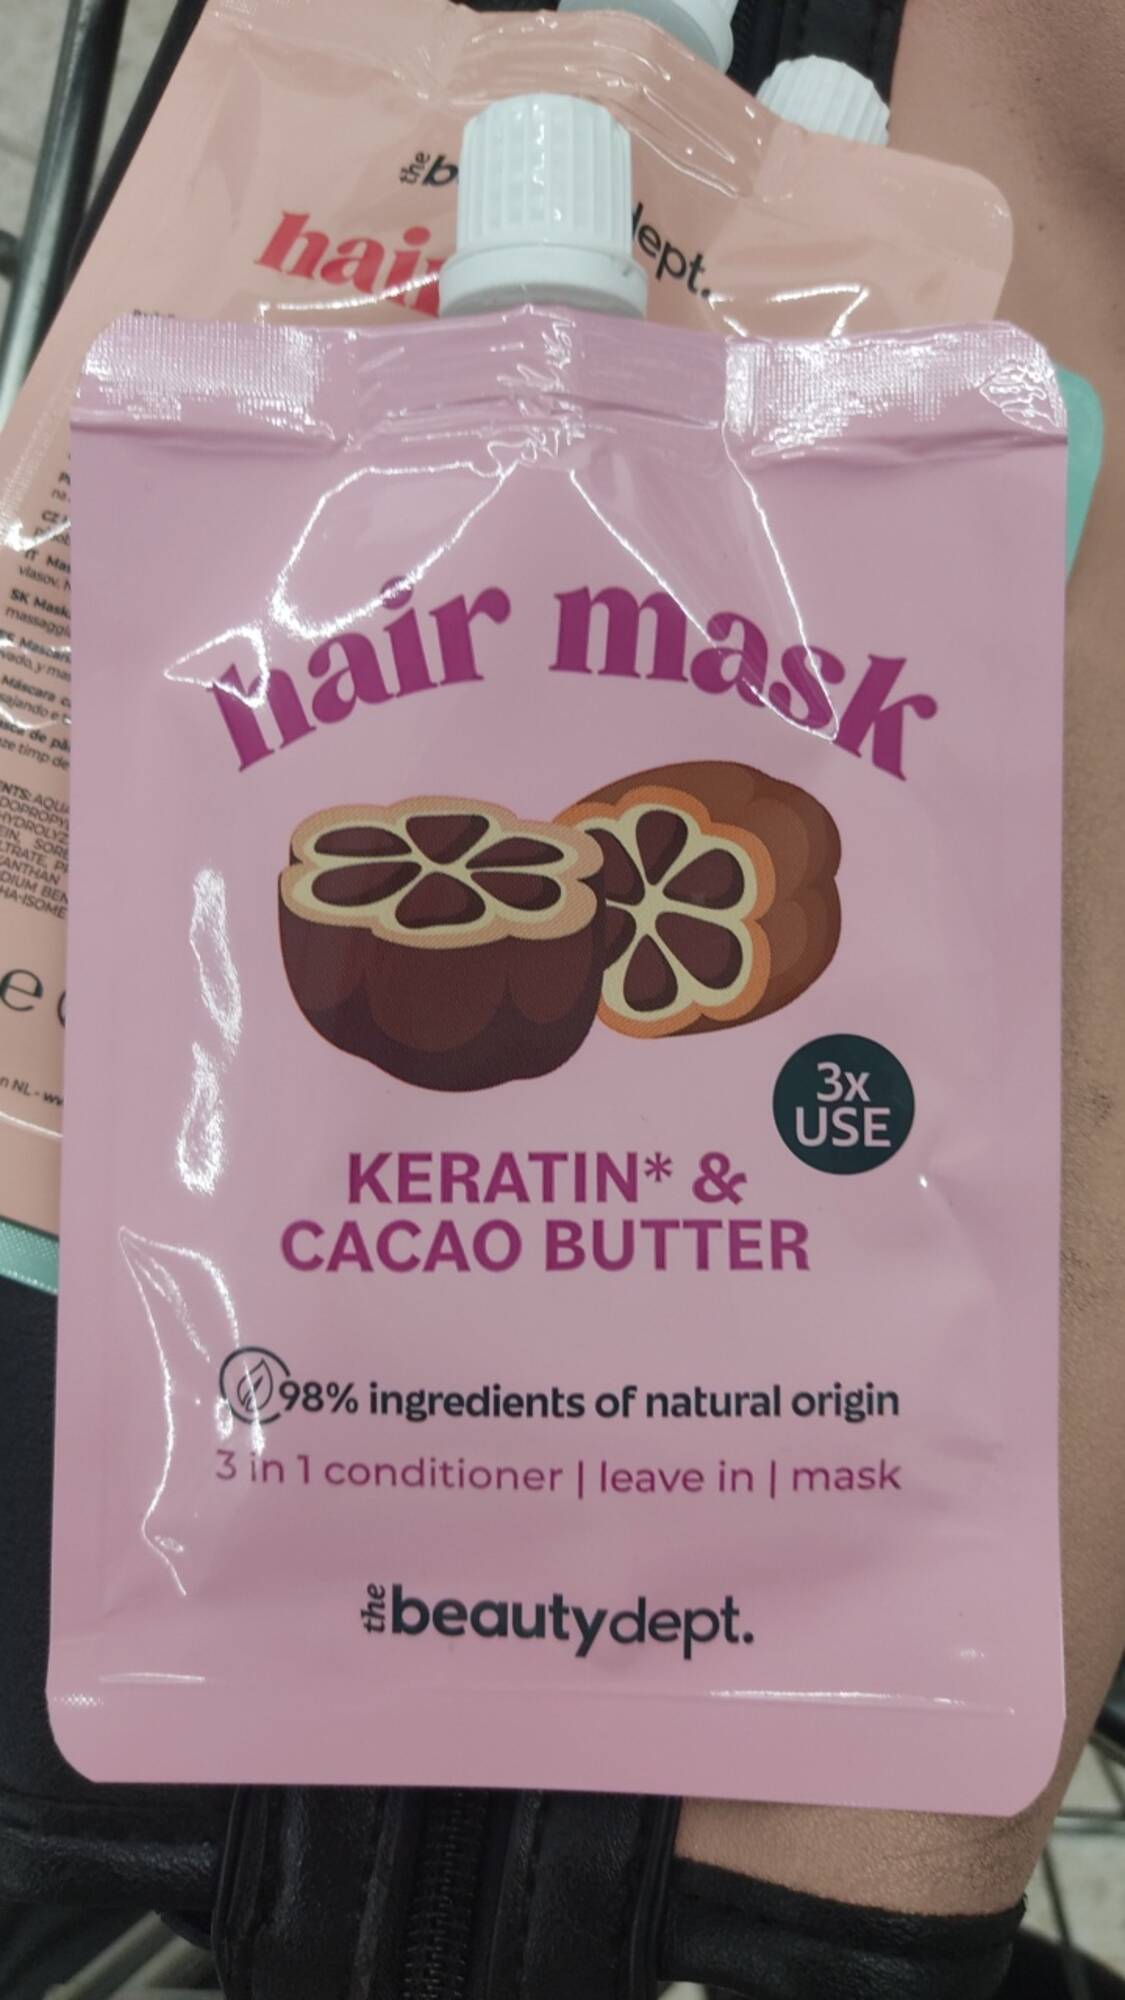 THE BEAUTY DEPT - Keratin & cacao butter - Hair mask  3 in 1